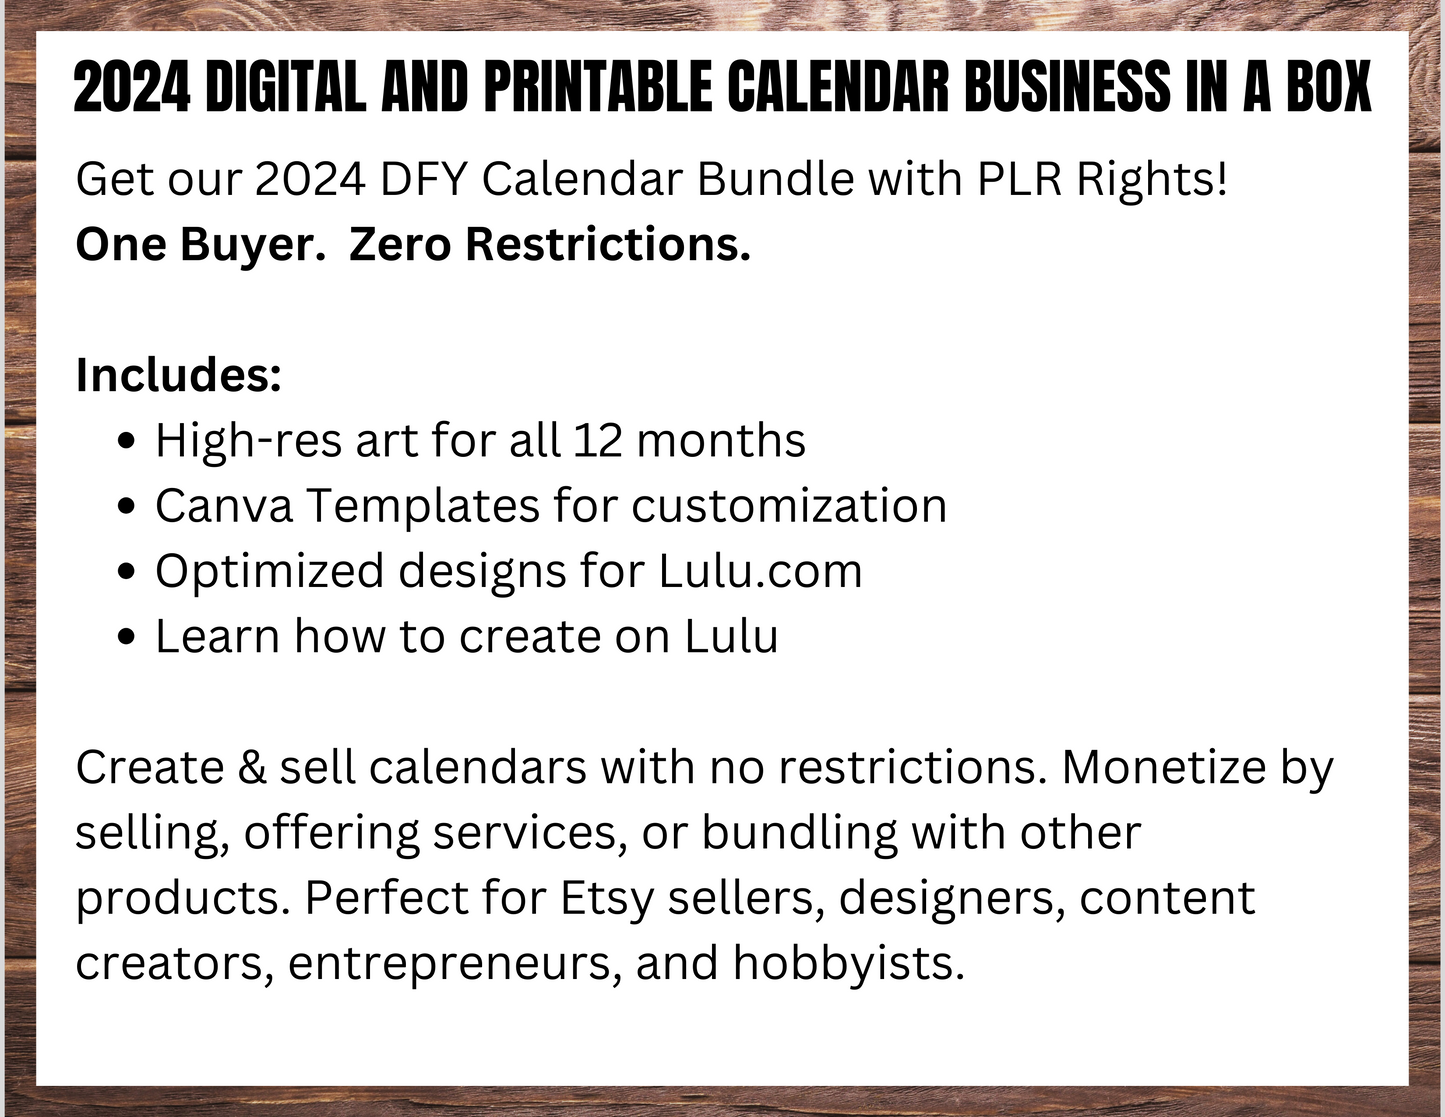 009-EB | Create & Sell Your Own 2024 Calendars | DFY Designs & Templates